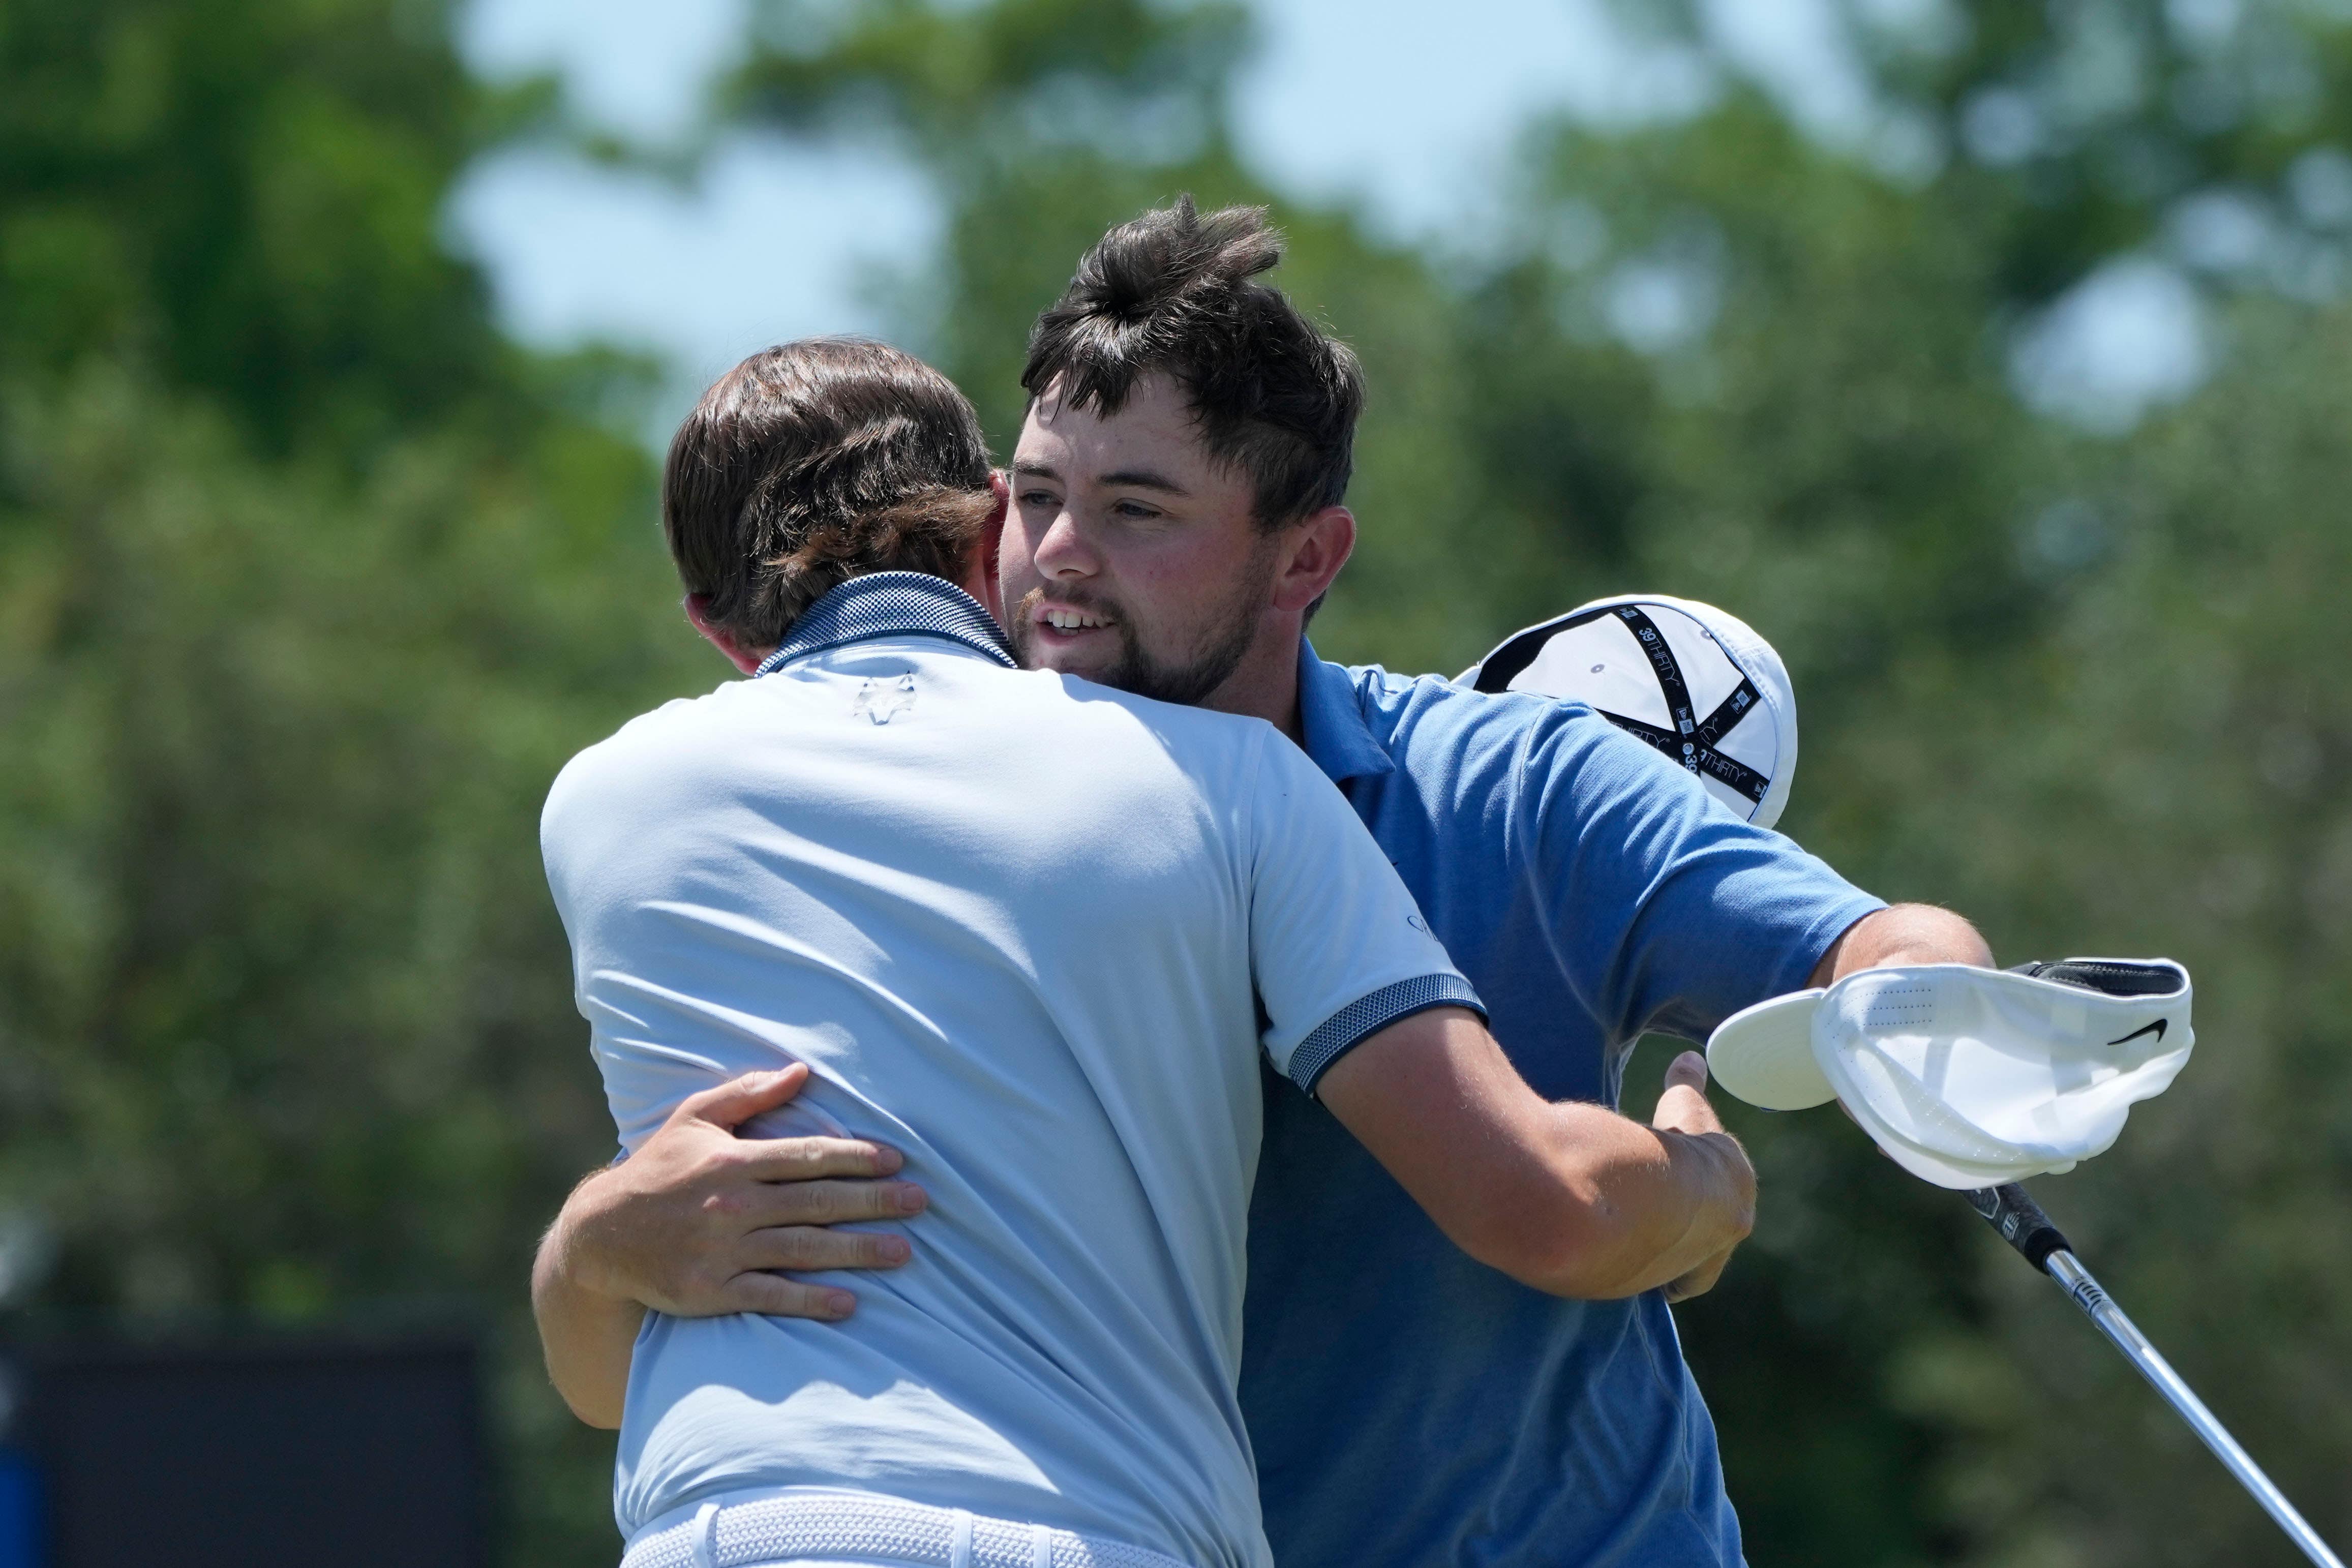 Matt and Alex Fitzpatrick have started the Zurich Classic of New Orleans strong after finishing the first day tied in third place in the doubles-style PGA competition. Matt Fitzpatrick, left, celebrates with his brother Alex Fitzpatrick, both of England, after finishing the day on the ninth green during the first round of the PGA Zurich Classic golf tournament at TPC Louisiana in Avondale, La., Thursday, April 20, 2023. (Gerald Herbert, AP Photo)